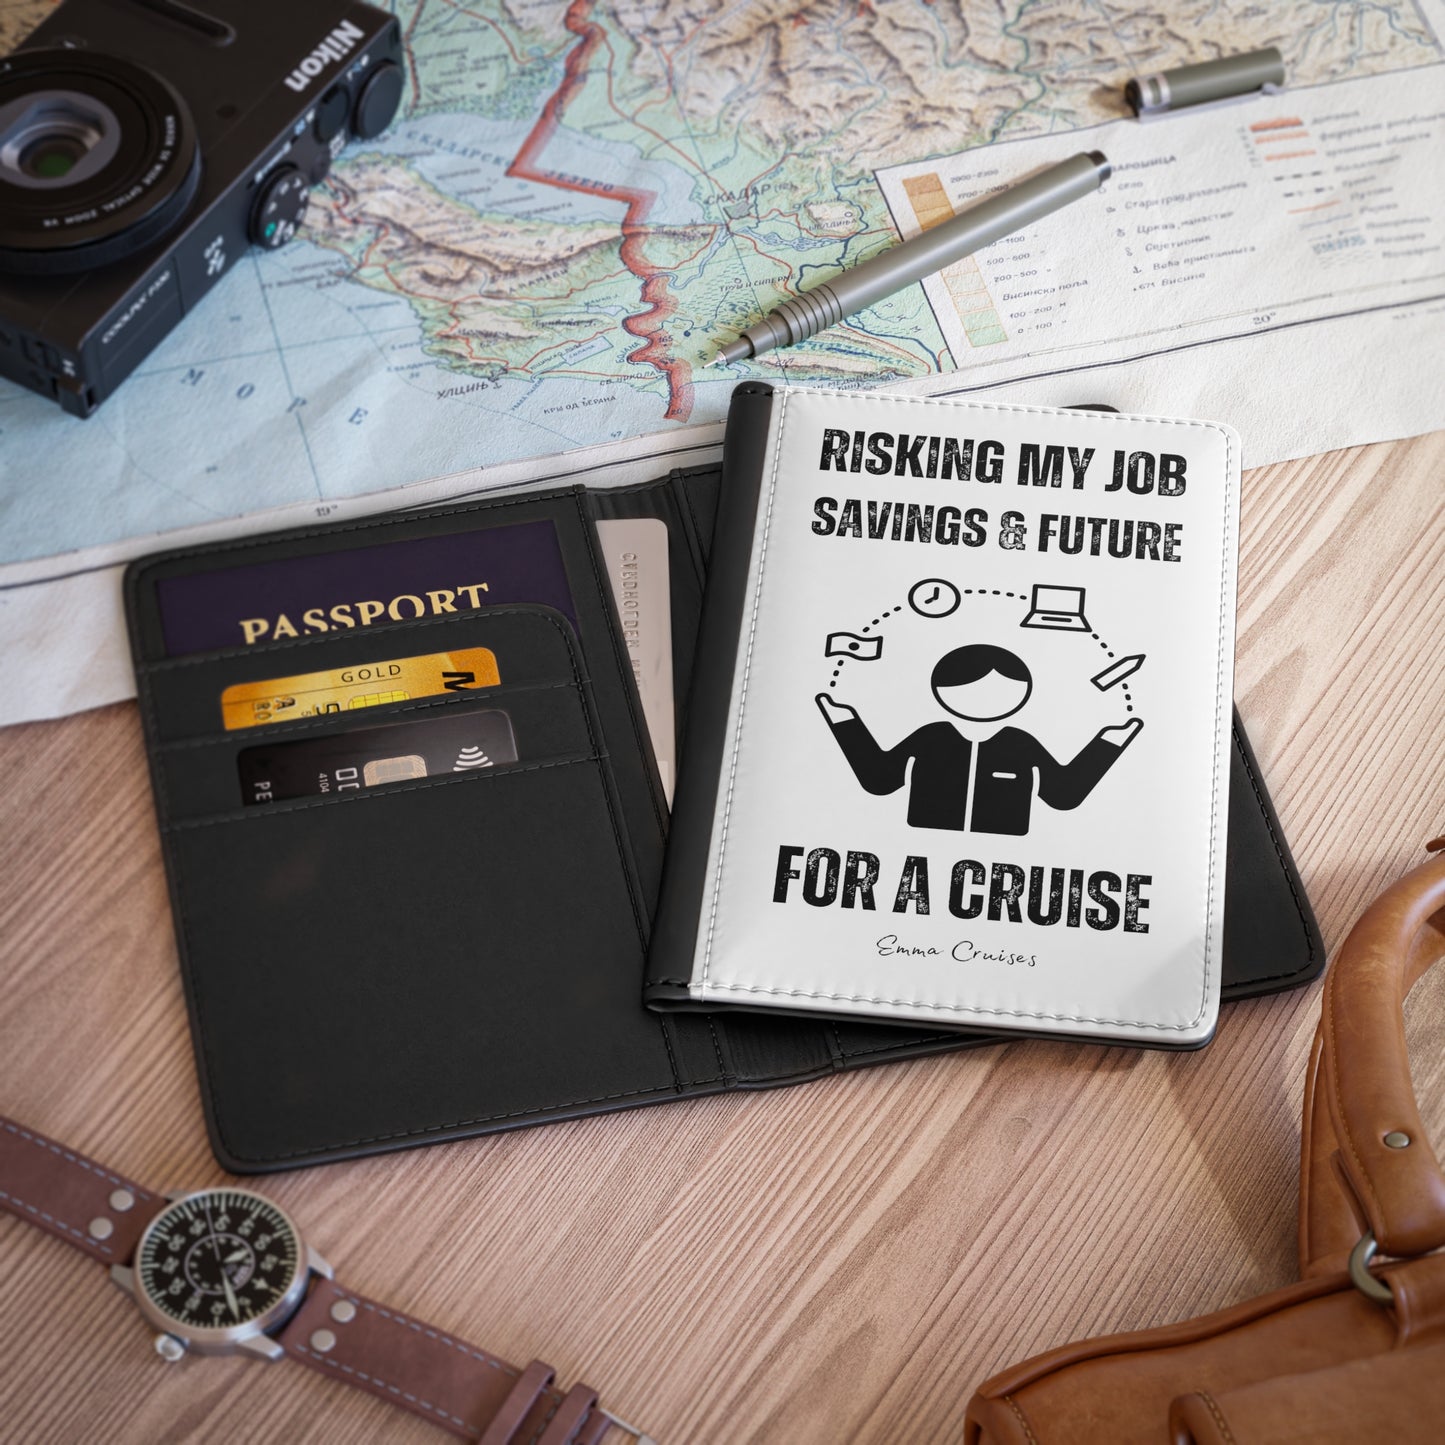 Risking Everything for a Cruise - Passport Cover